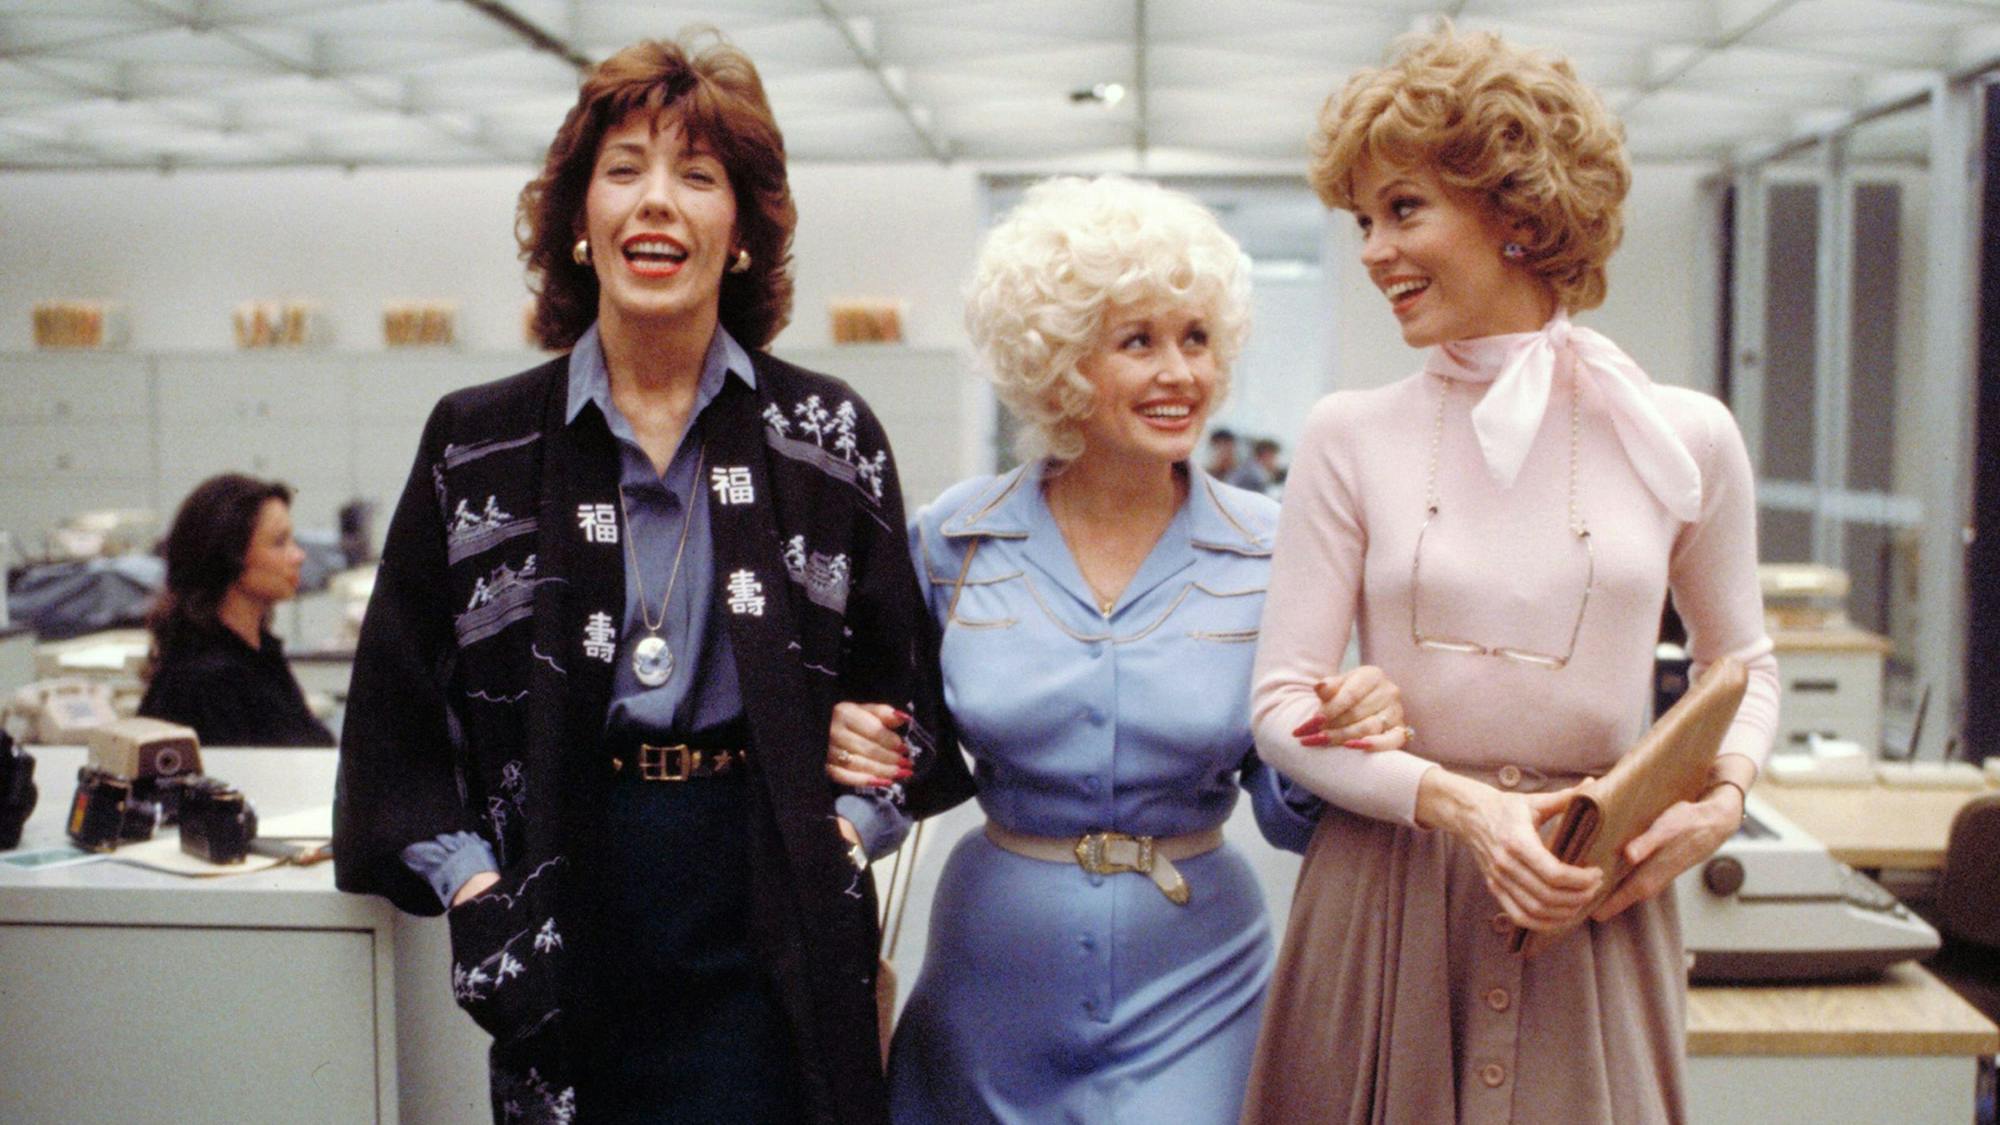 Lily Tomlin, Dolly Parton, and Jane Fonda walk through the office in a still from 9 to 5. Tomlin has on a black jacket over a blue button-up and black trousers. Parton wears a blue shirt dress cinched at the waist with a belt. Fonda wears a pink long sleeved top with a scarf tied around her neck and a high waisted skirt. 